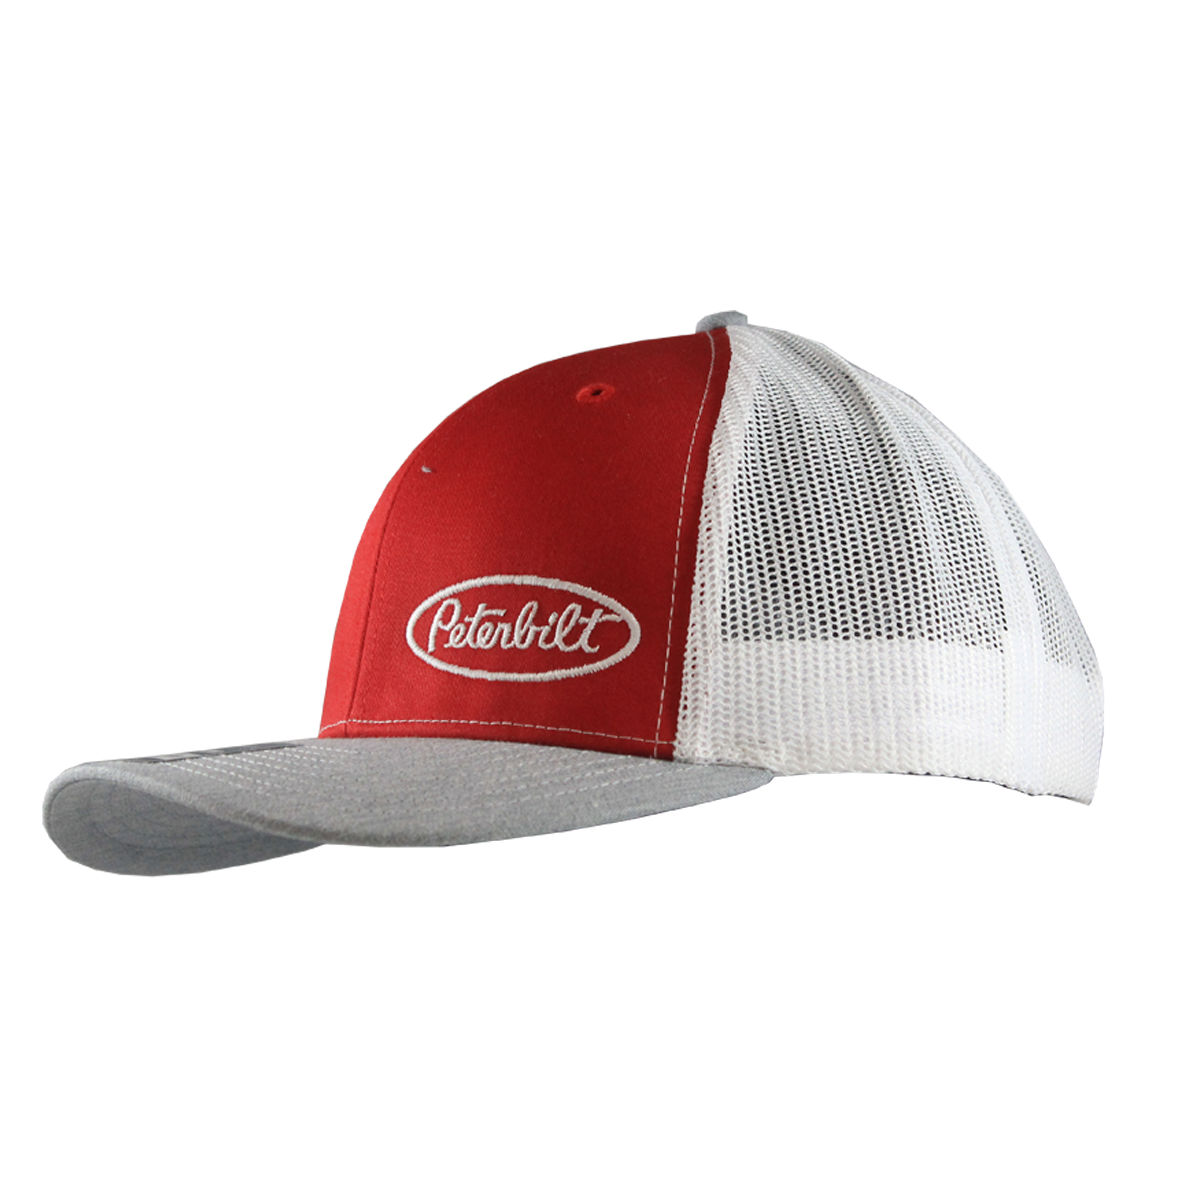 Classic Gray and Red Hat with White Peterbilt Logo Mesh Trucker Cap